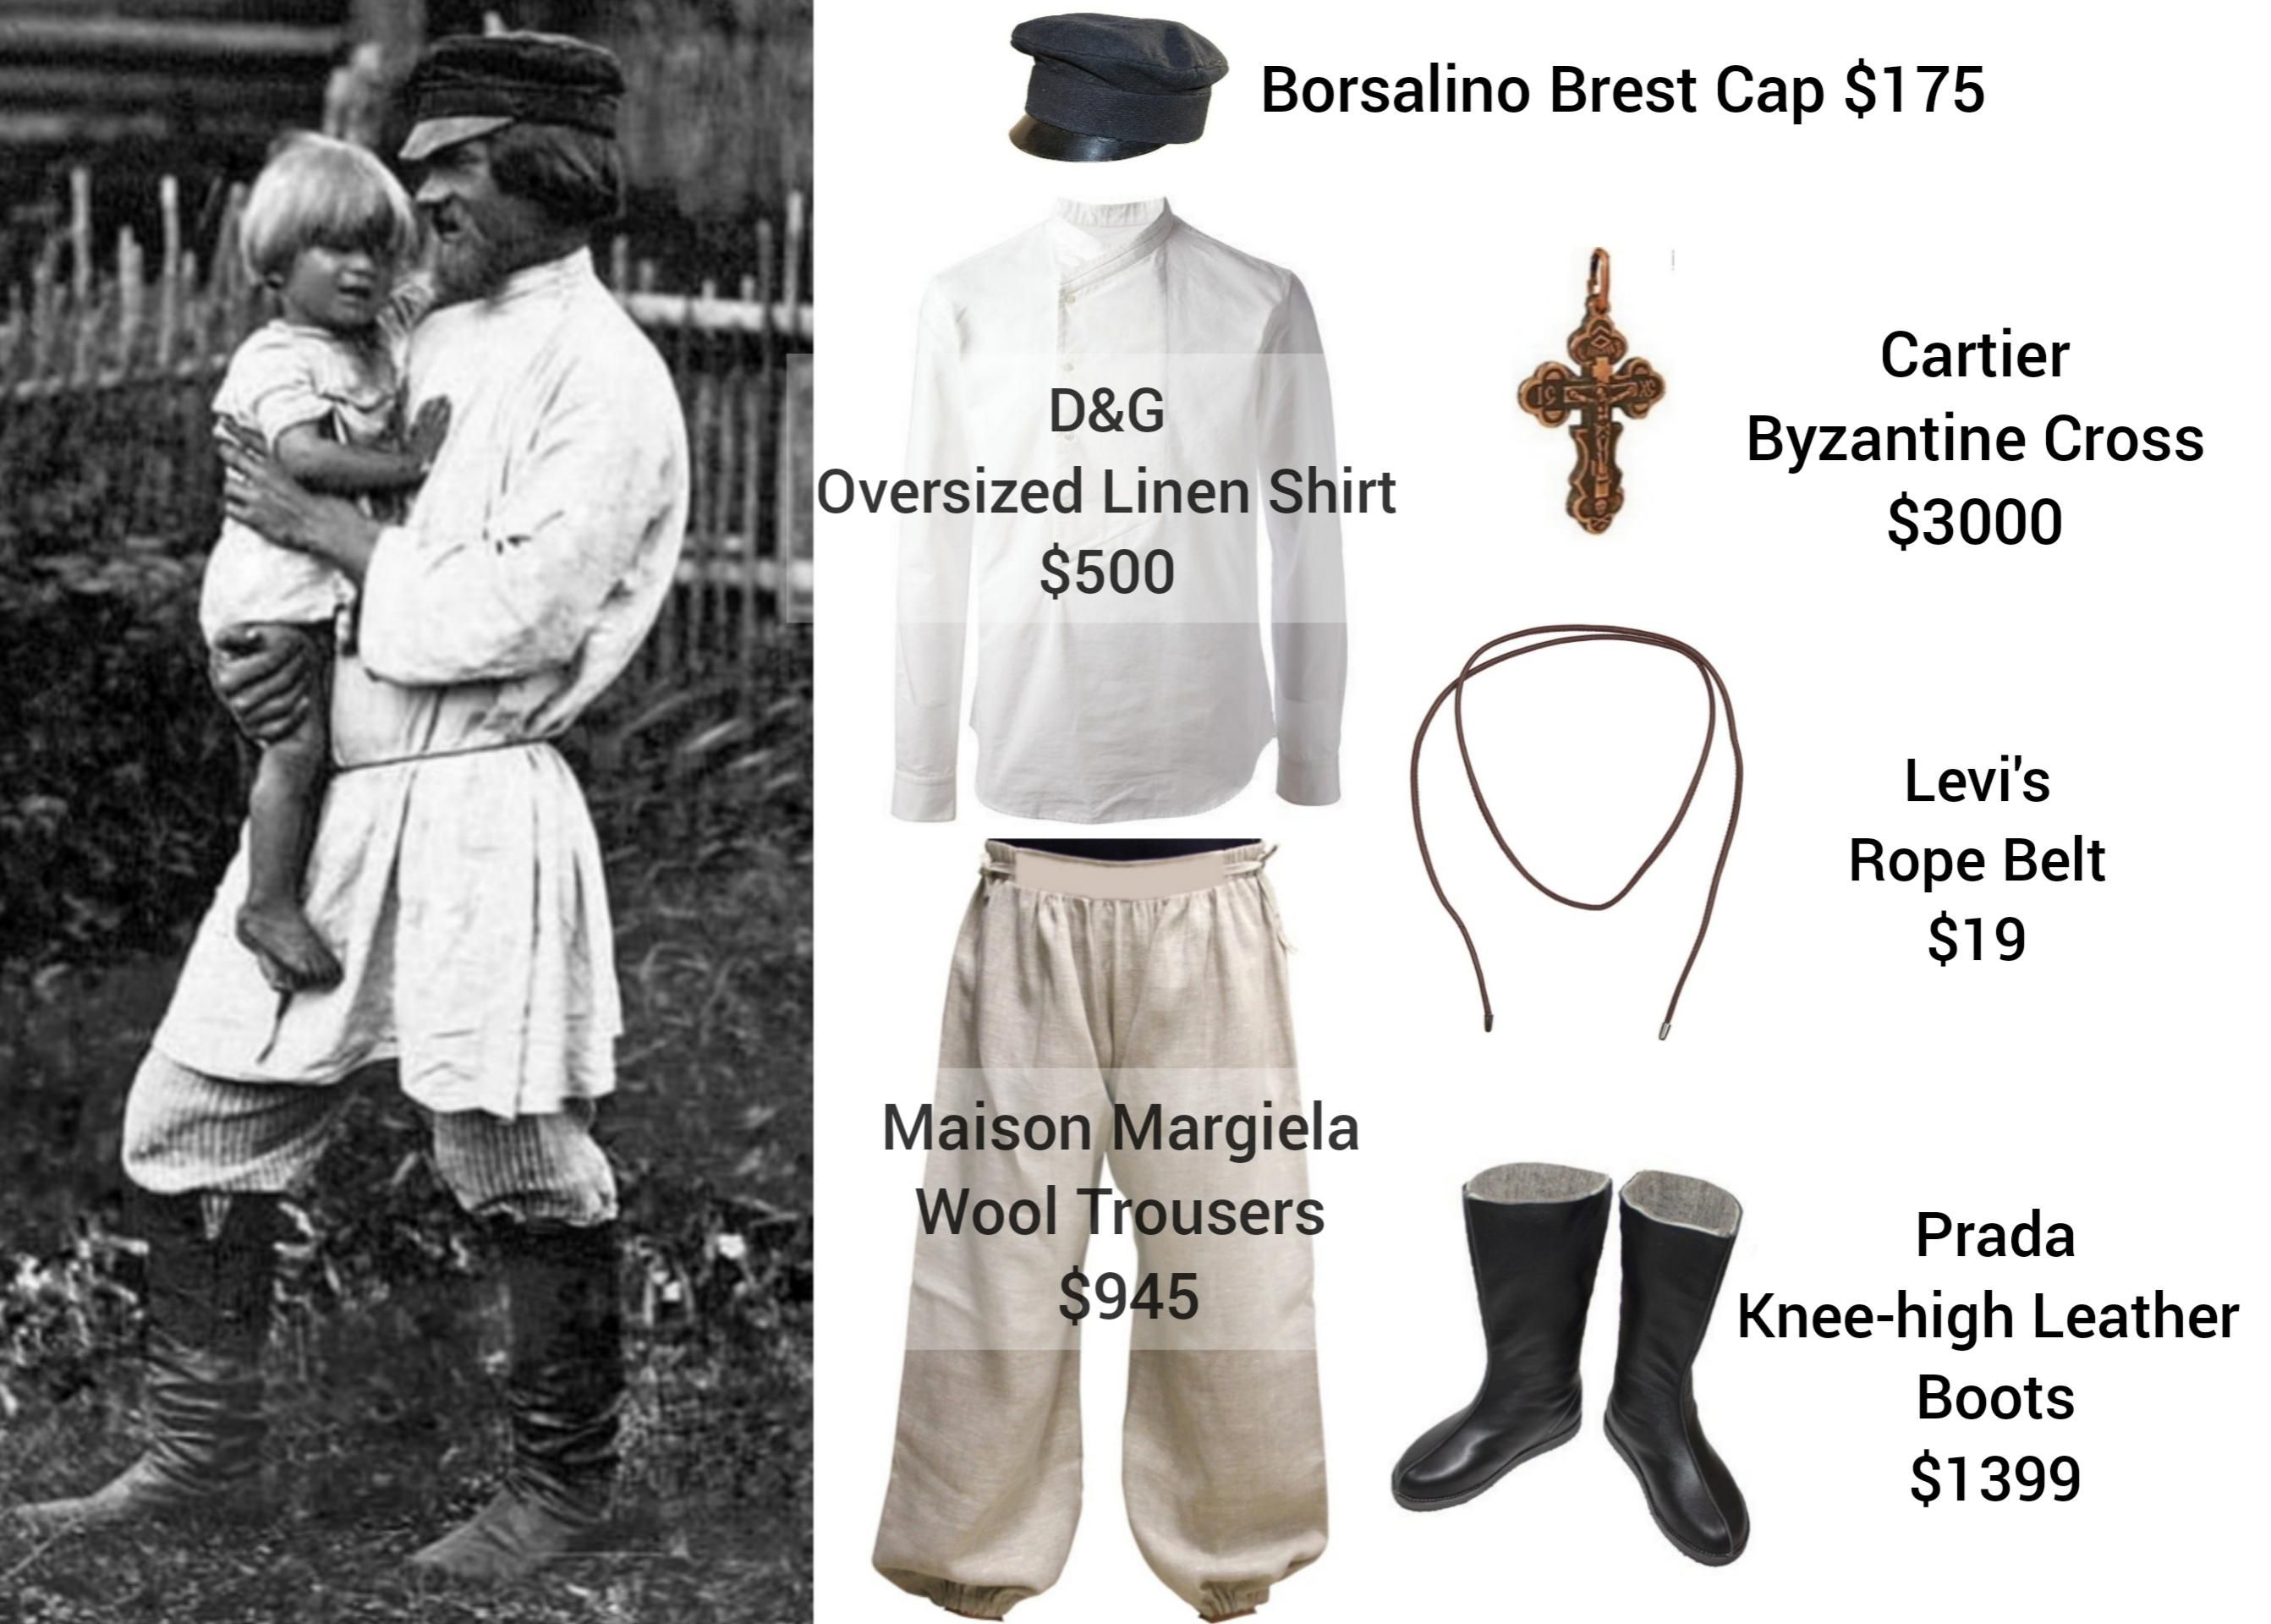 Steal his look. 1870's Russian peasant edition.